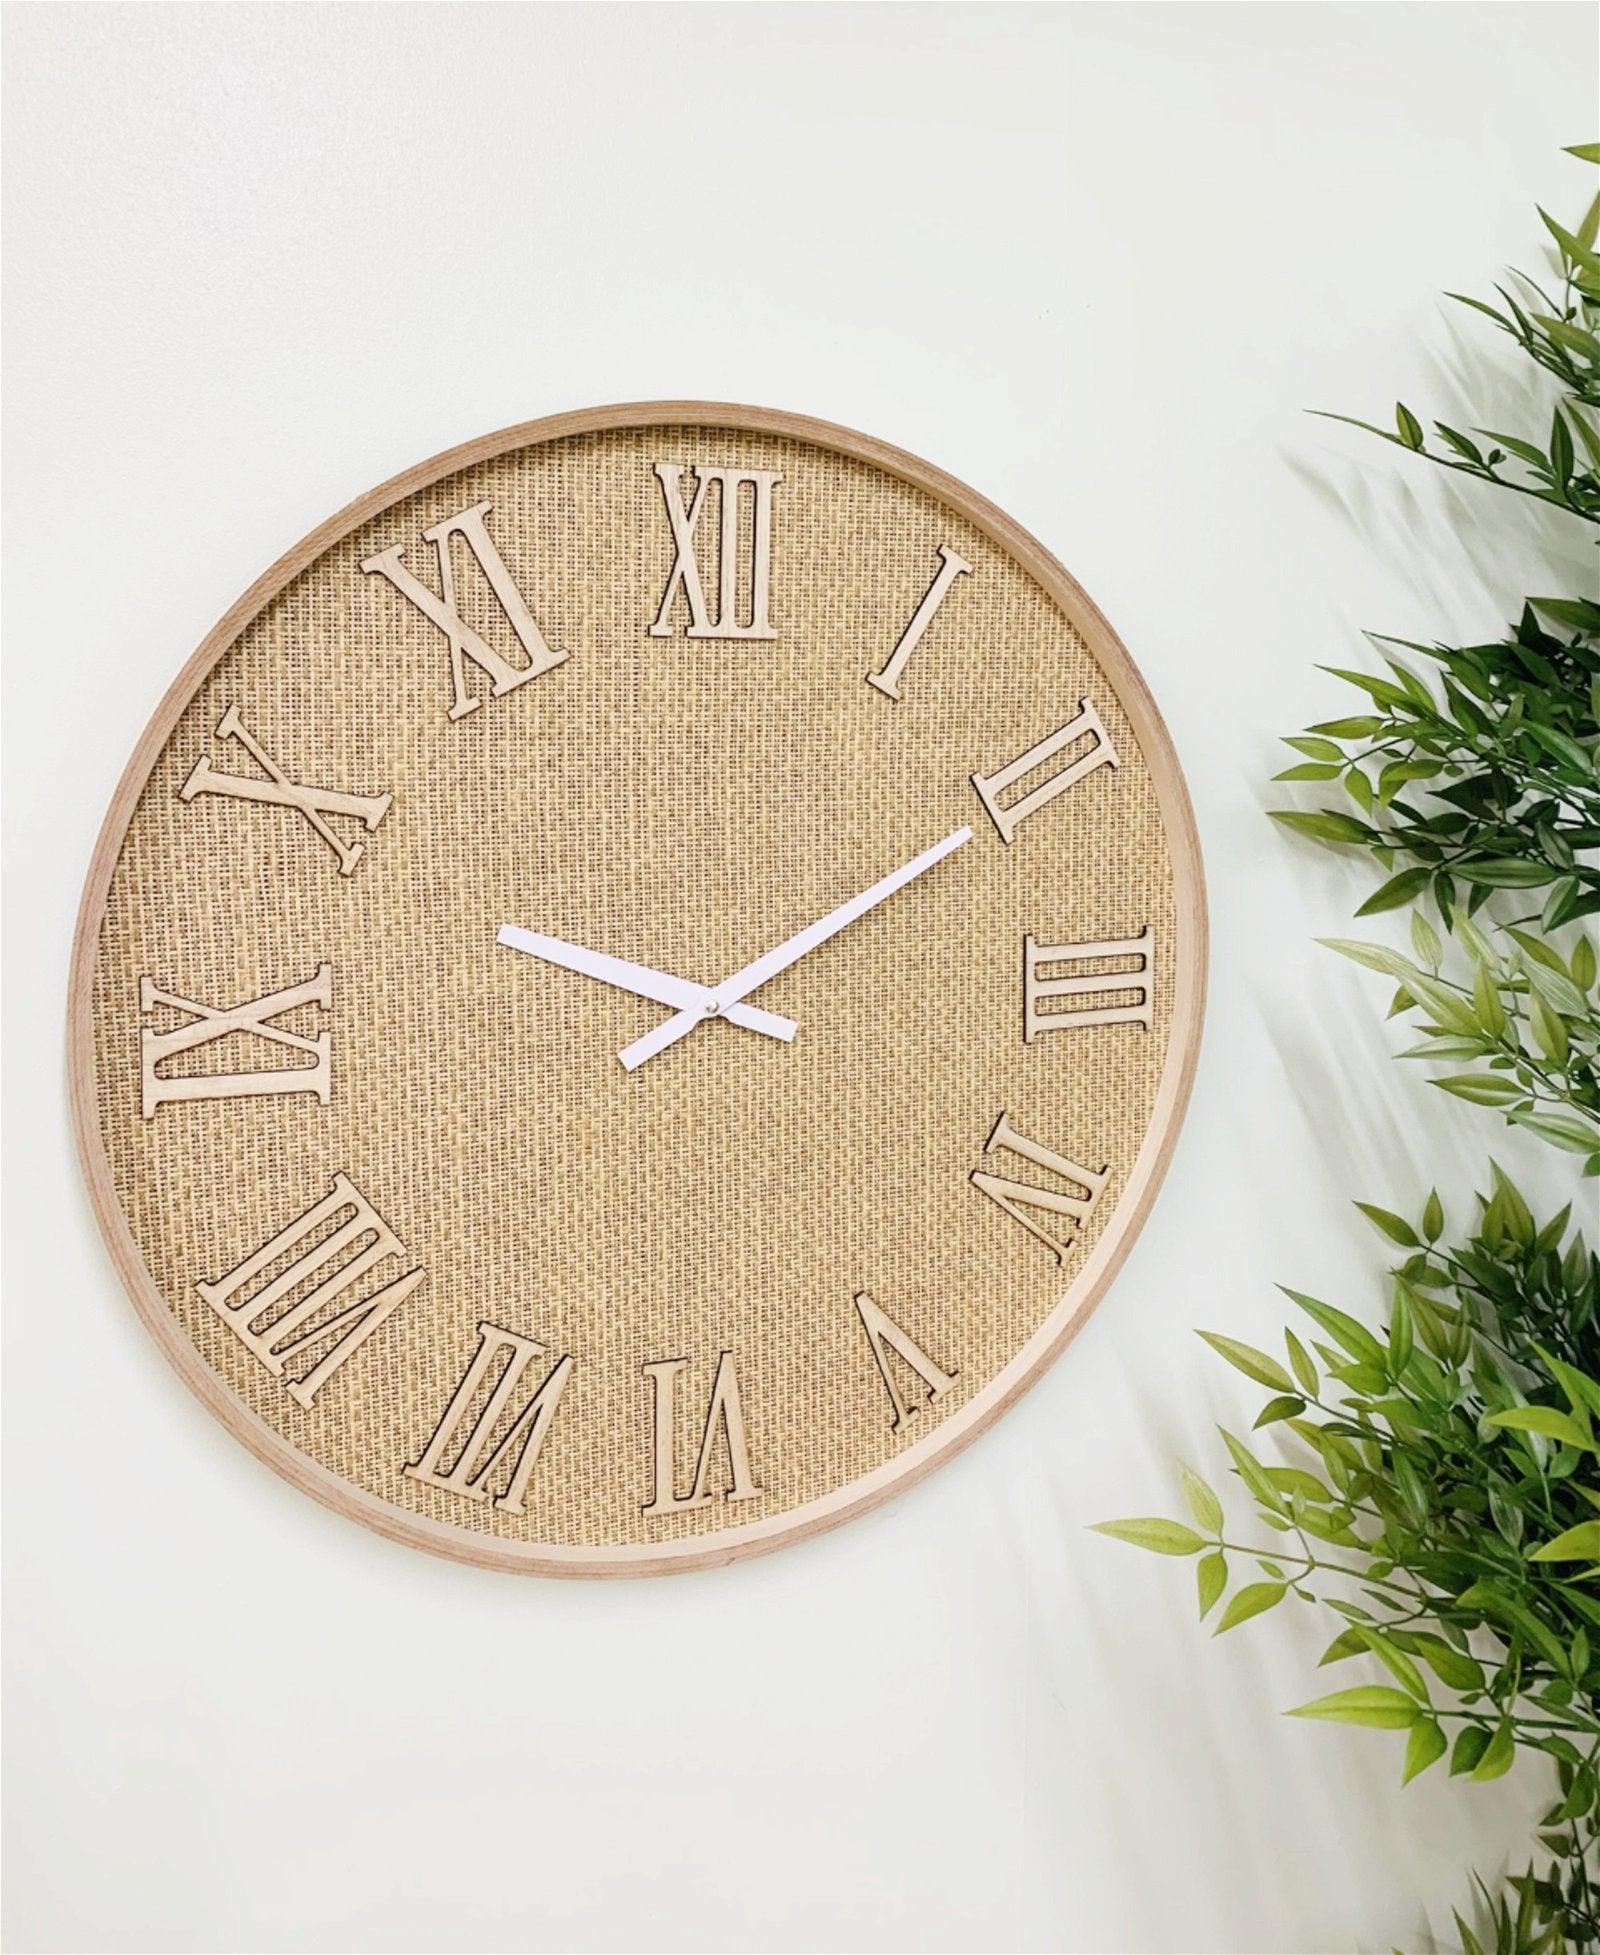 View Serenity Hessian Woven Wall Clock 50cm information